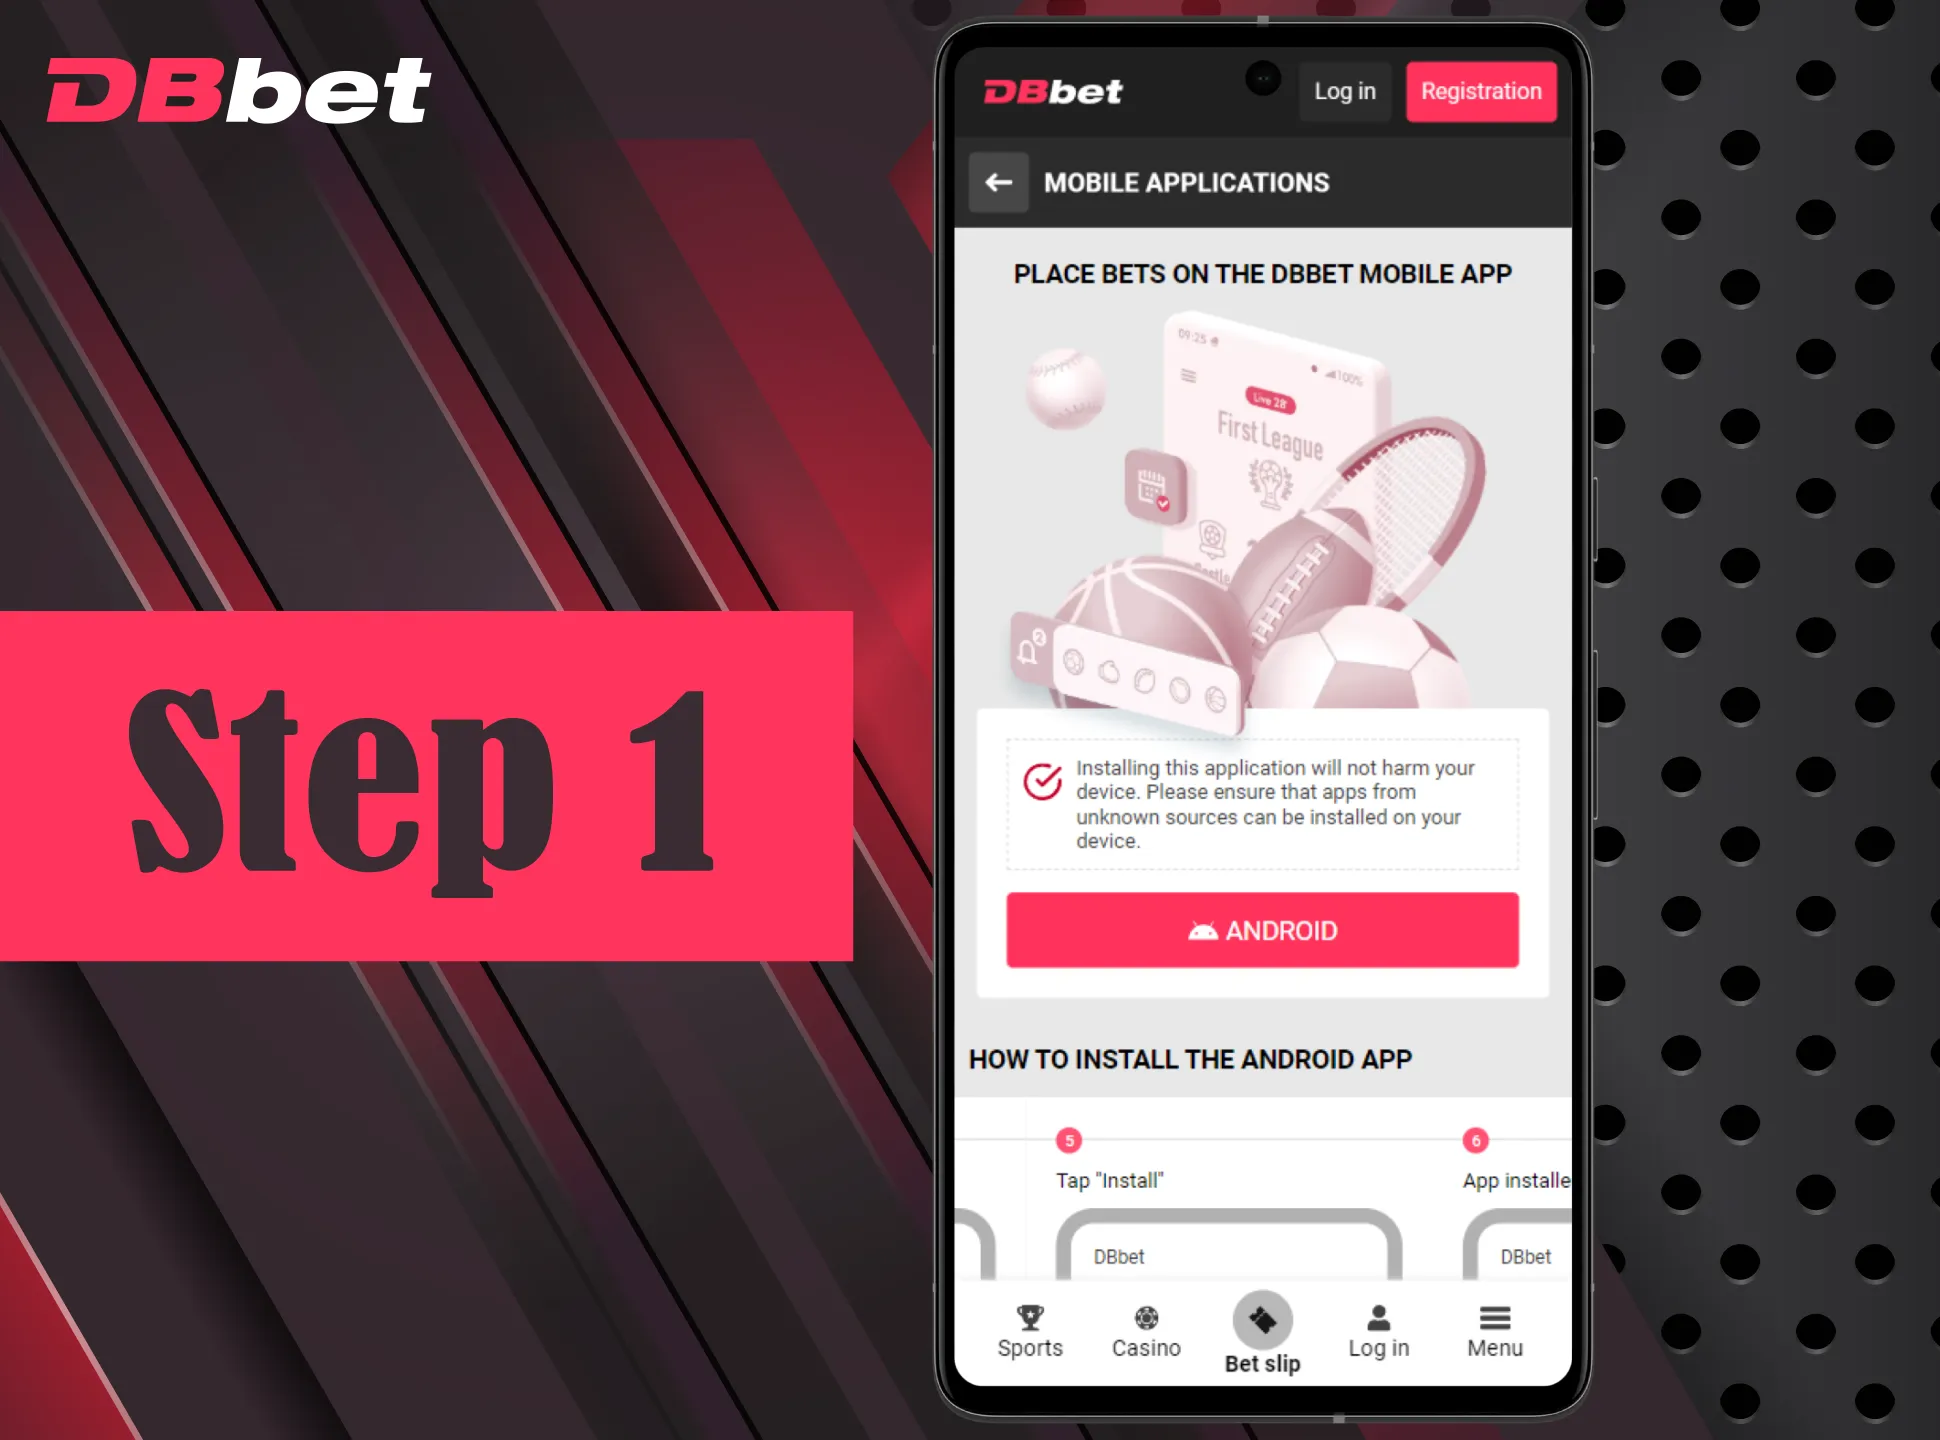 Download APK file from DBbet app download page.